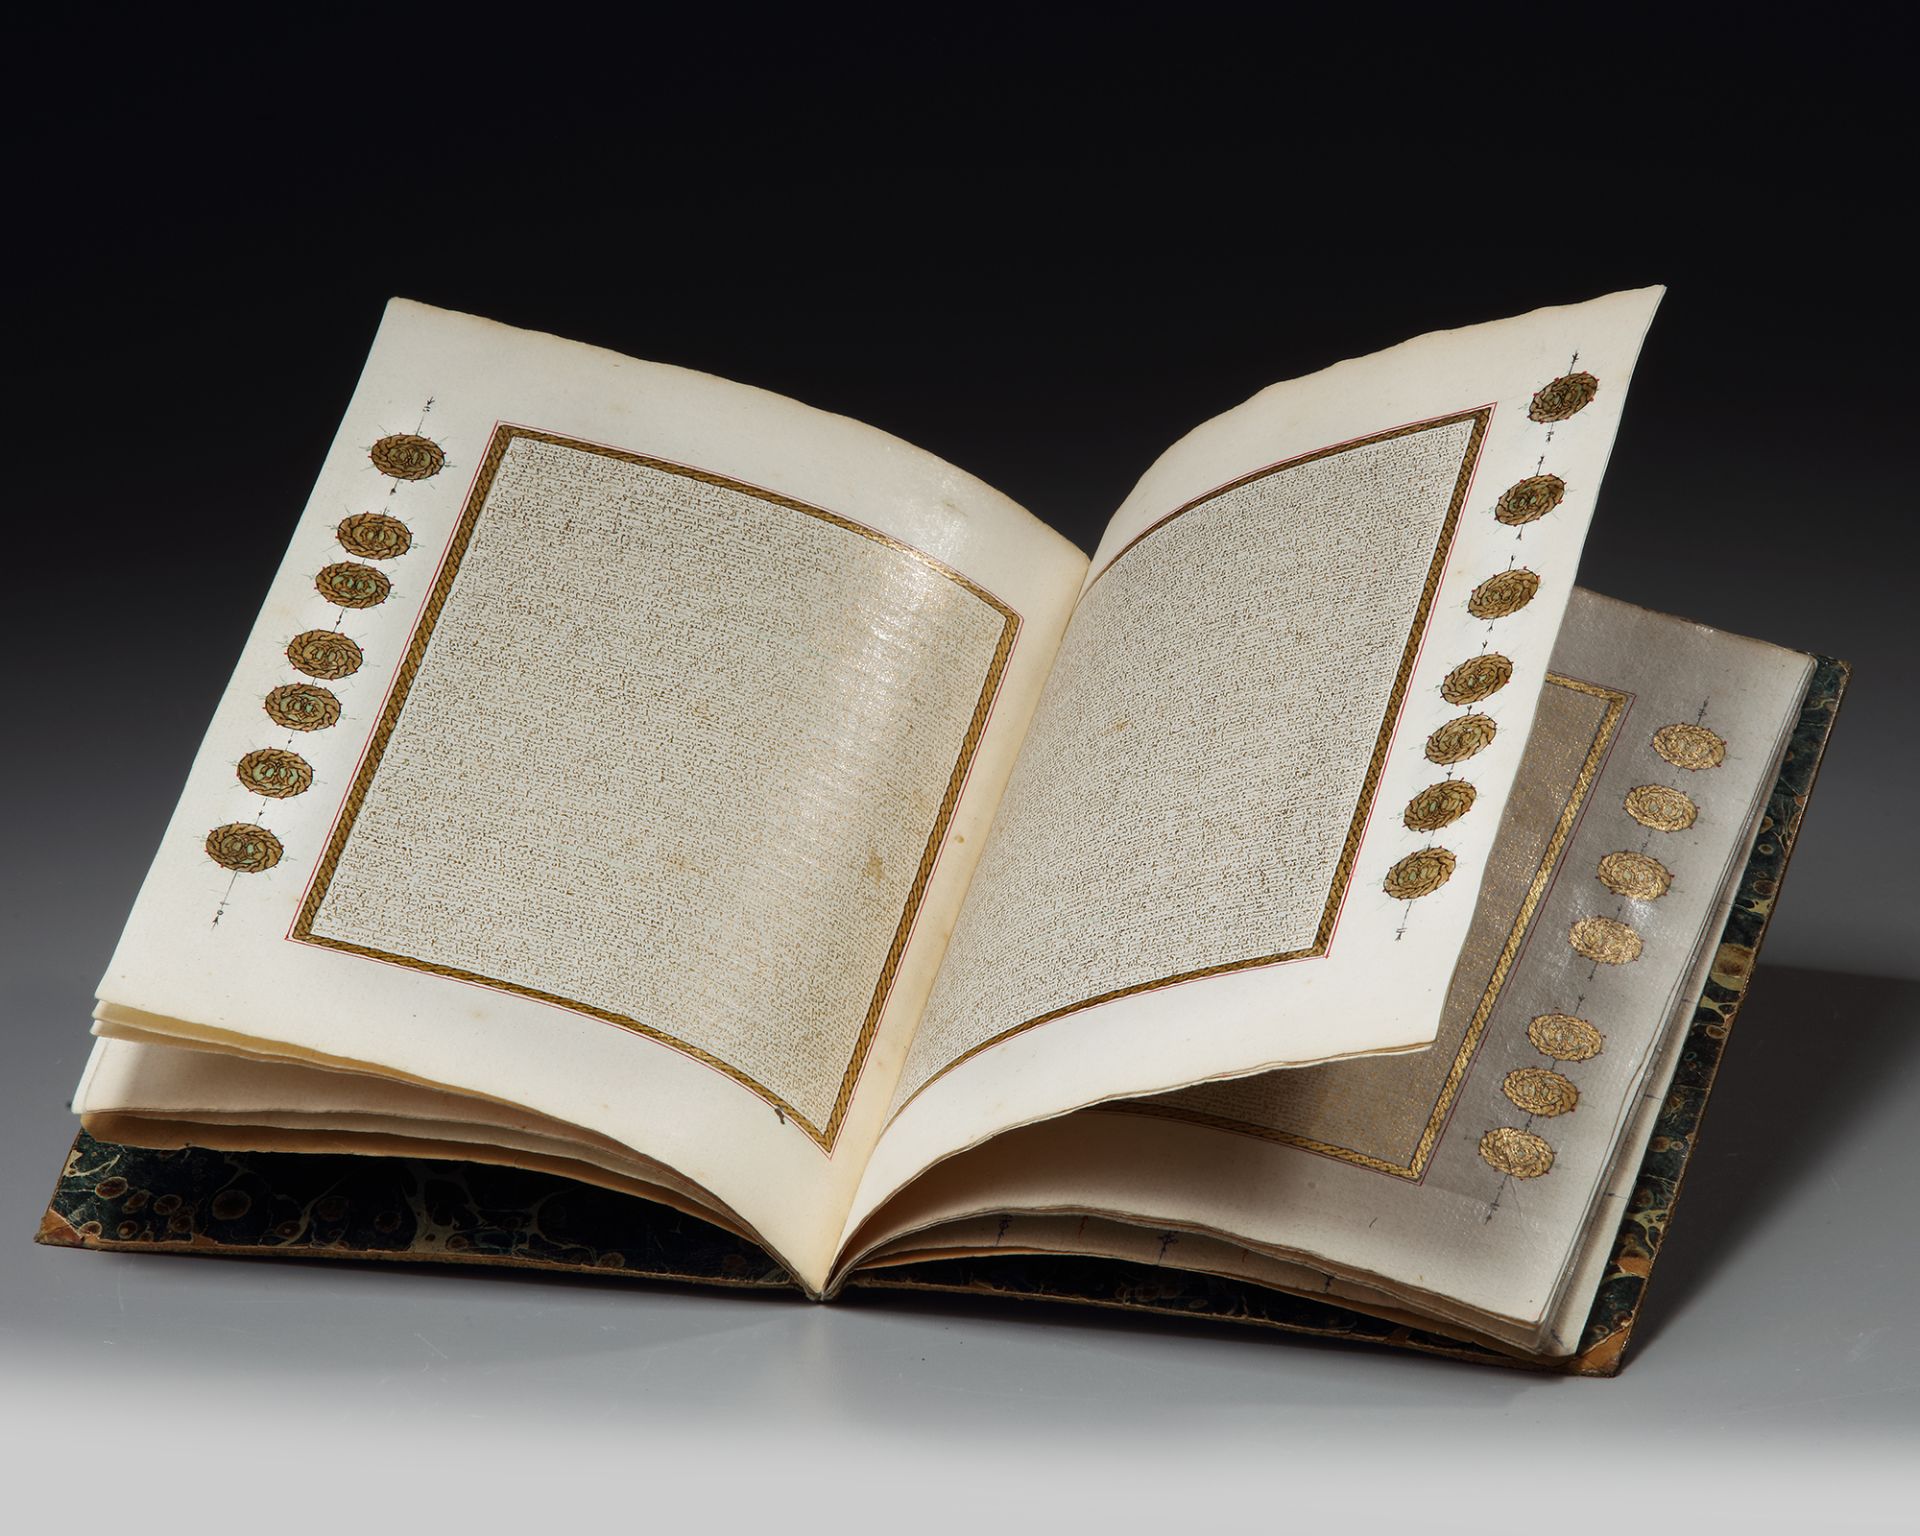 AN OTTOMAN ILLUMINATED QURAN IN GOLD - Image 2 of 3